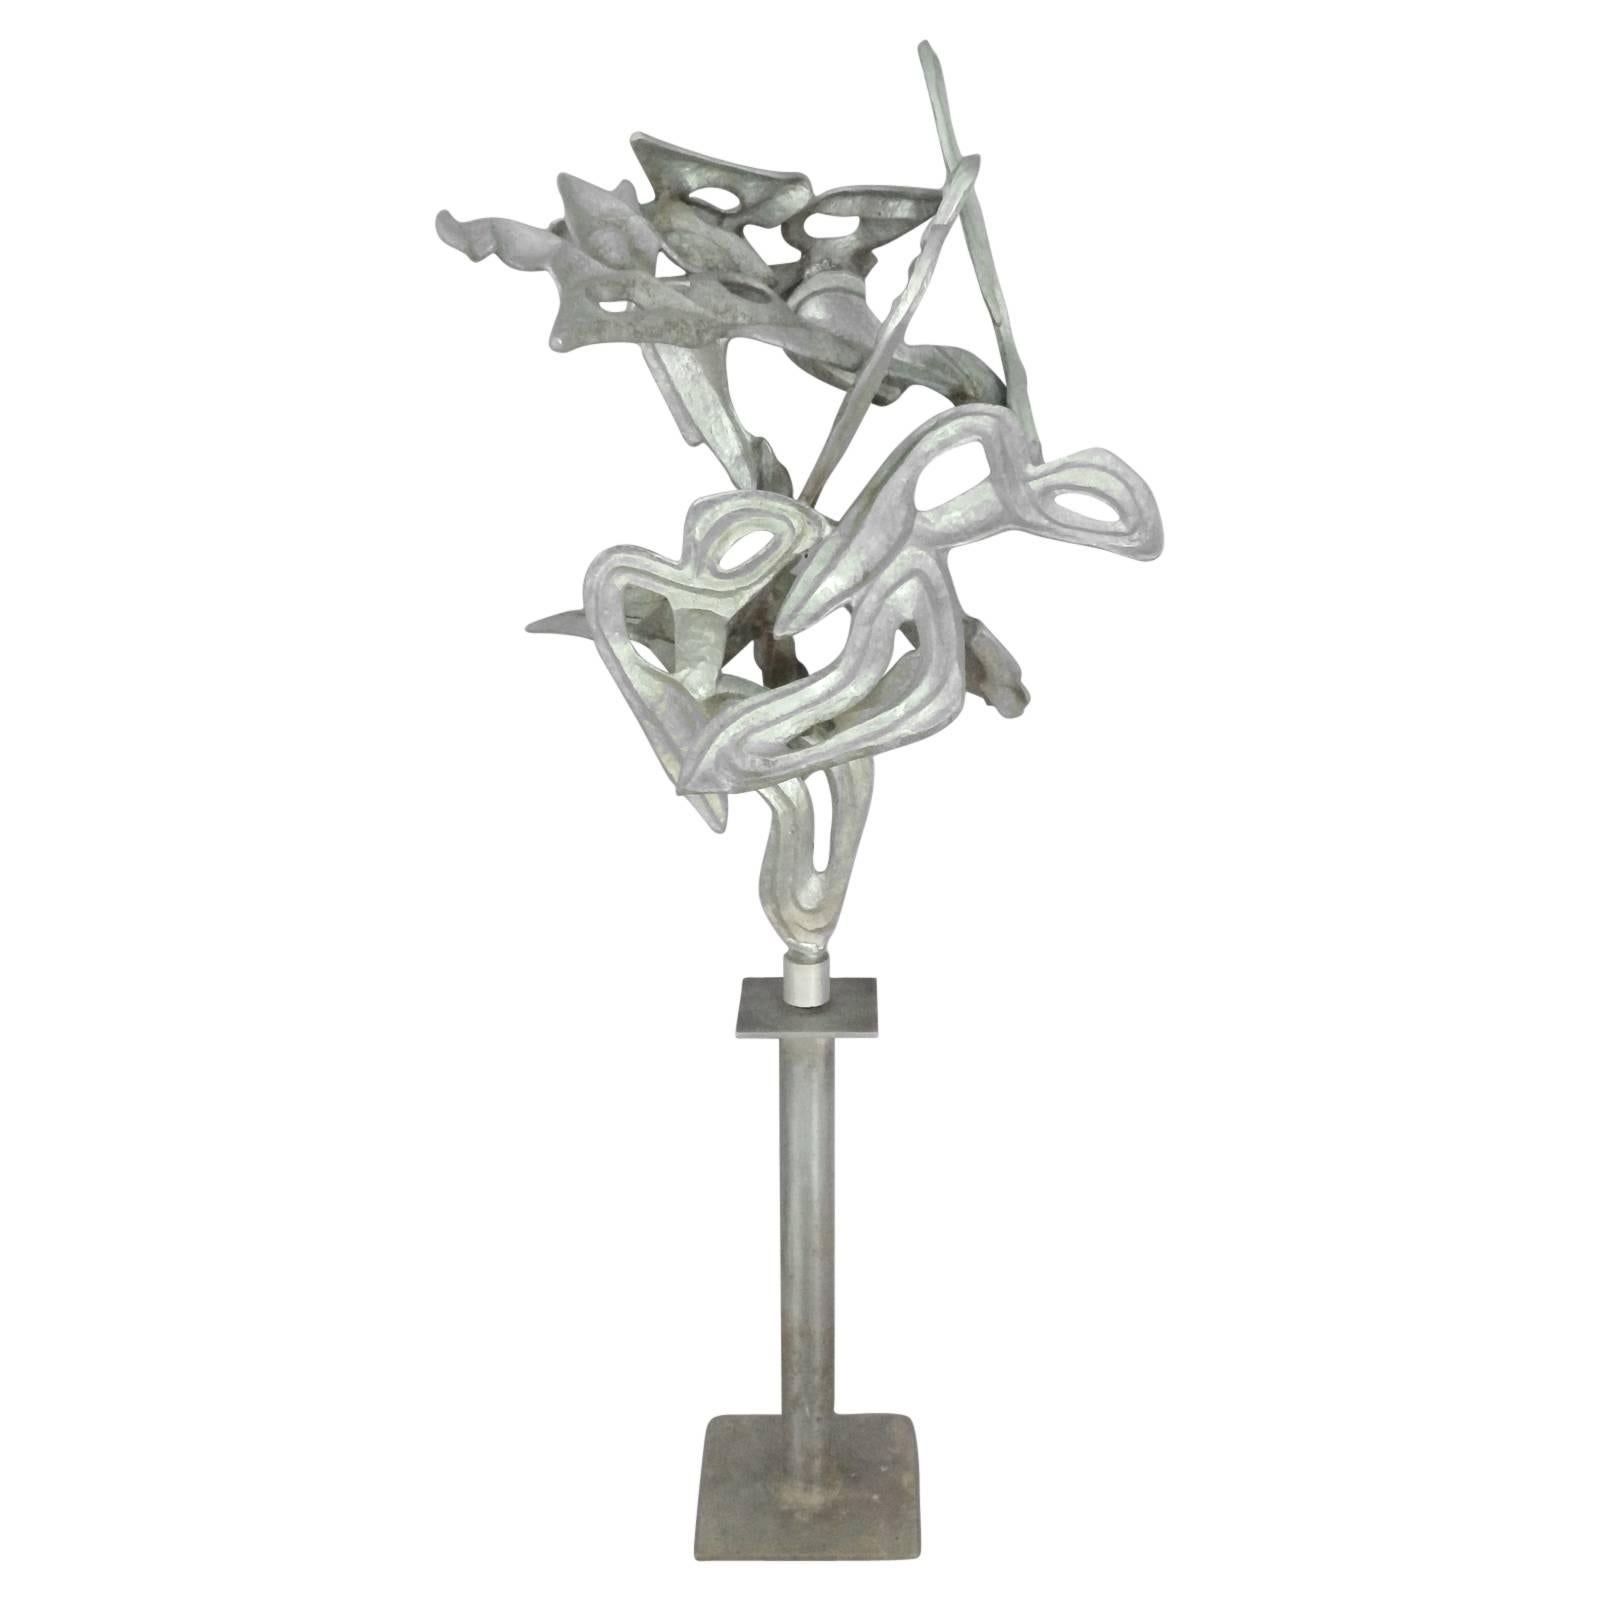 Cast and welded organic form abstract aluminum sculpture signed Joseph 